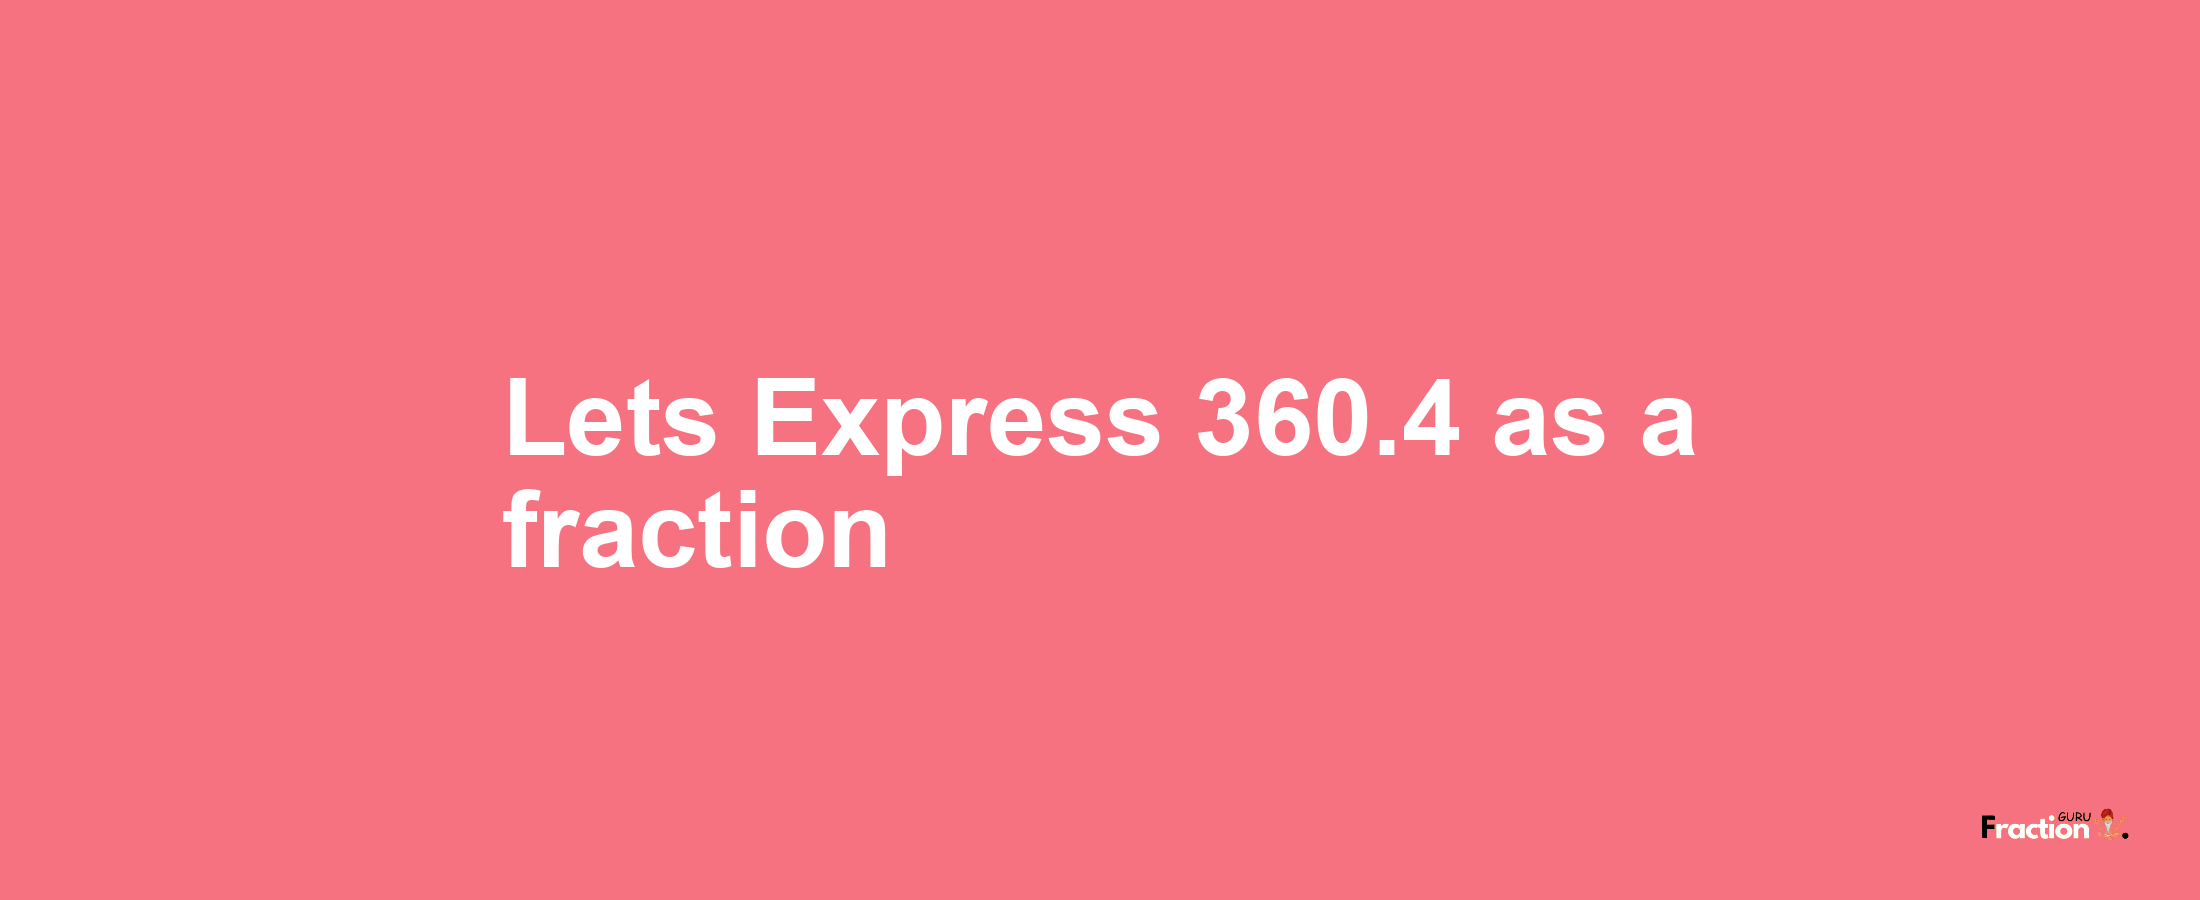 Lets Express 360.4 as afraction